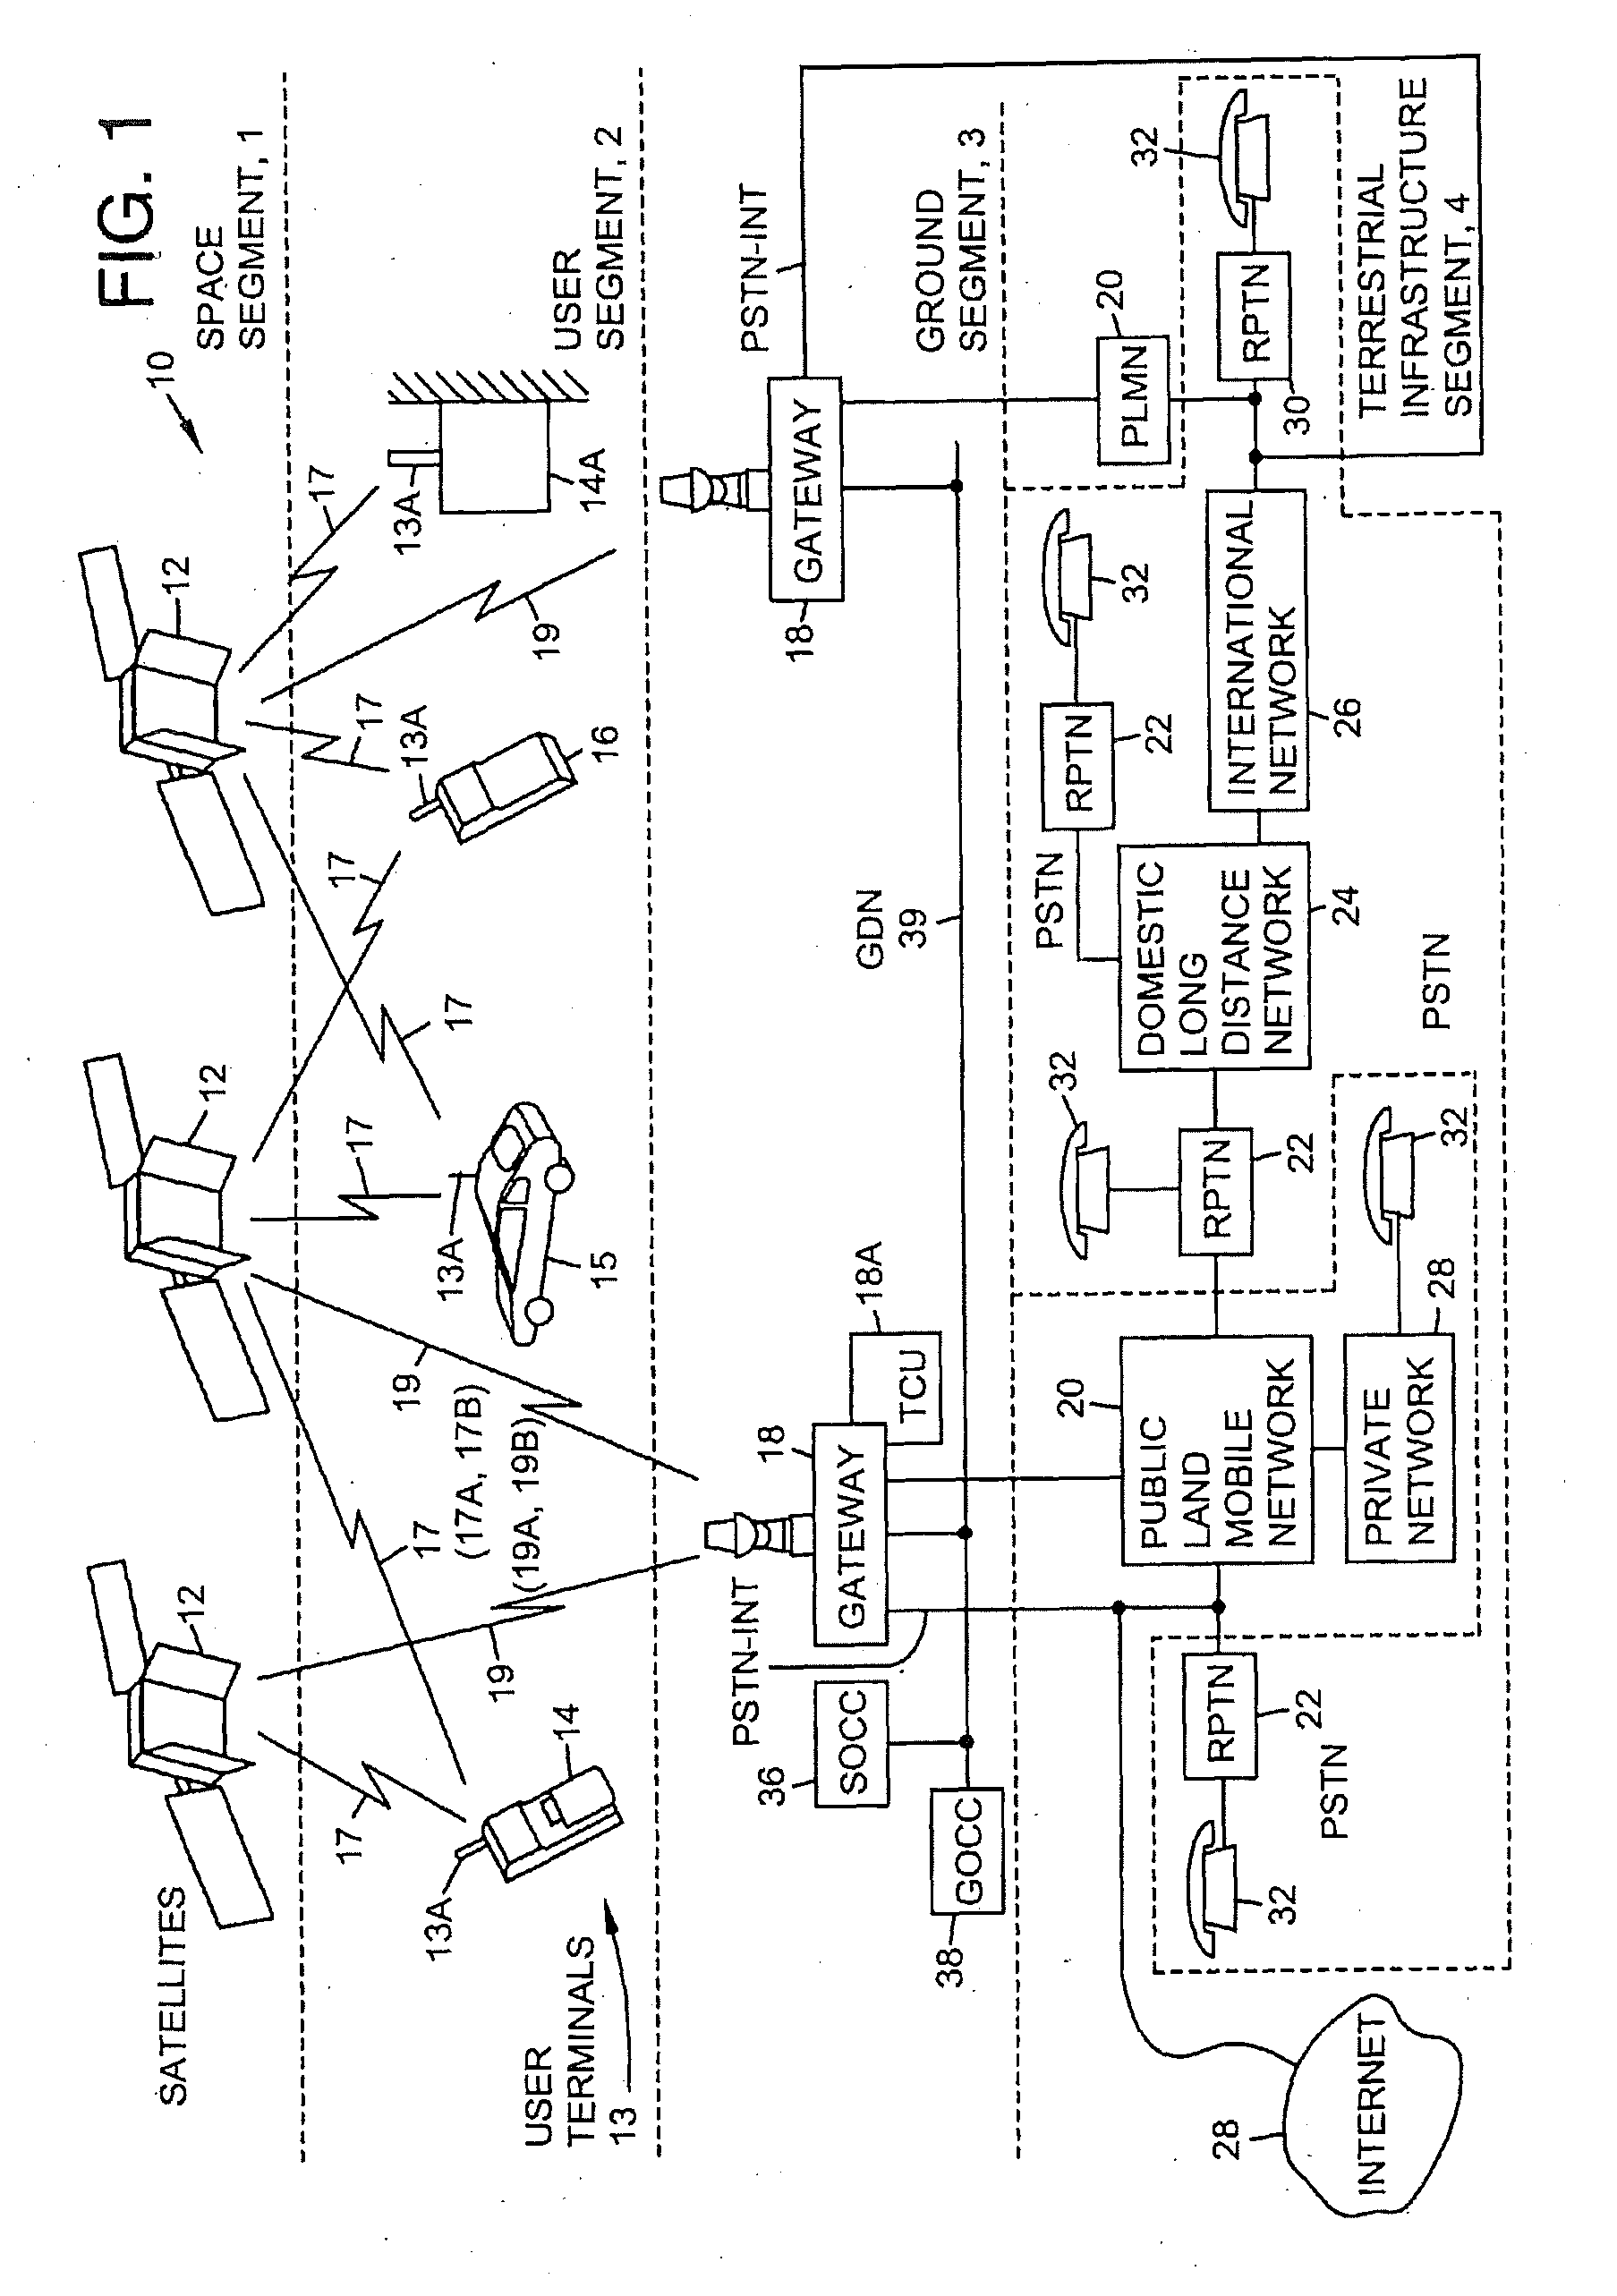 Satellite communication system employing a combination of time slots and orthogonal codes